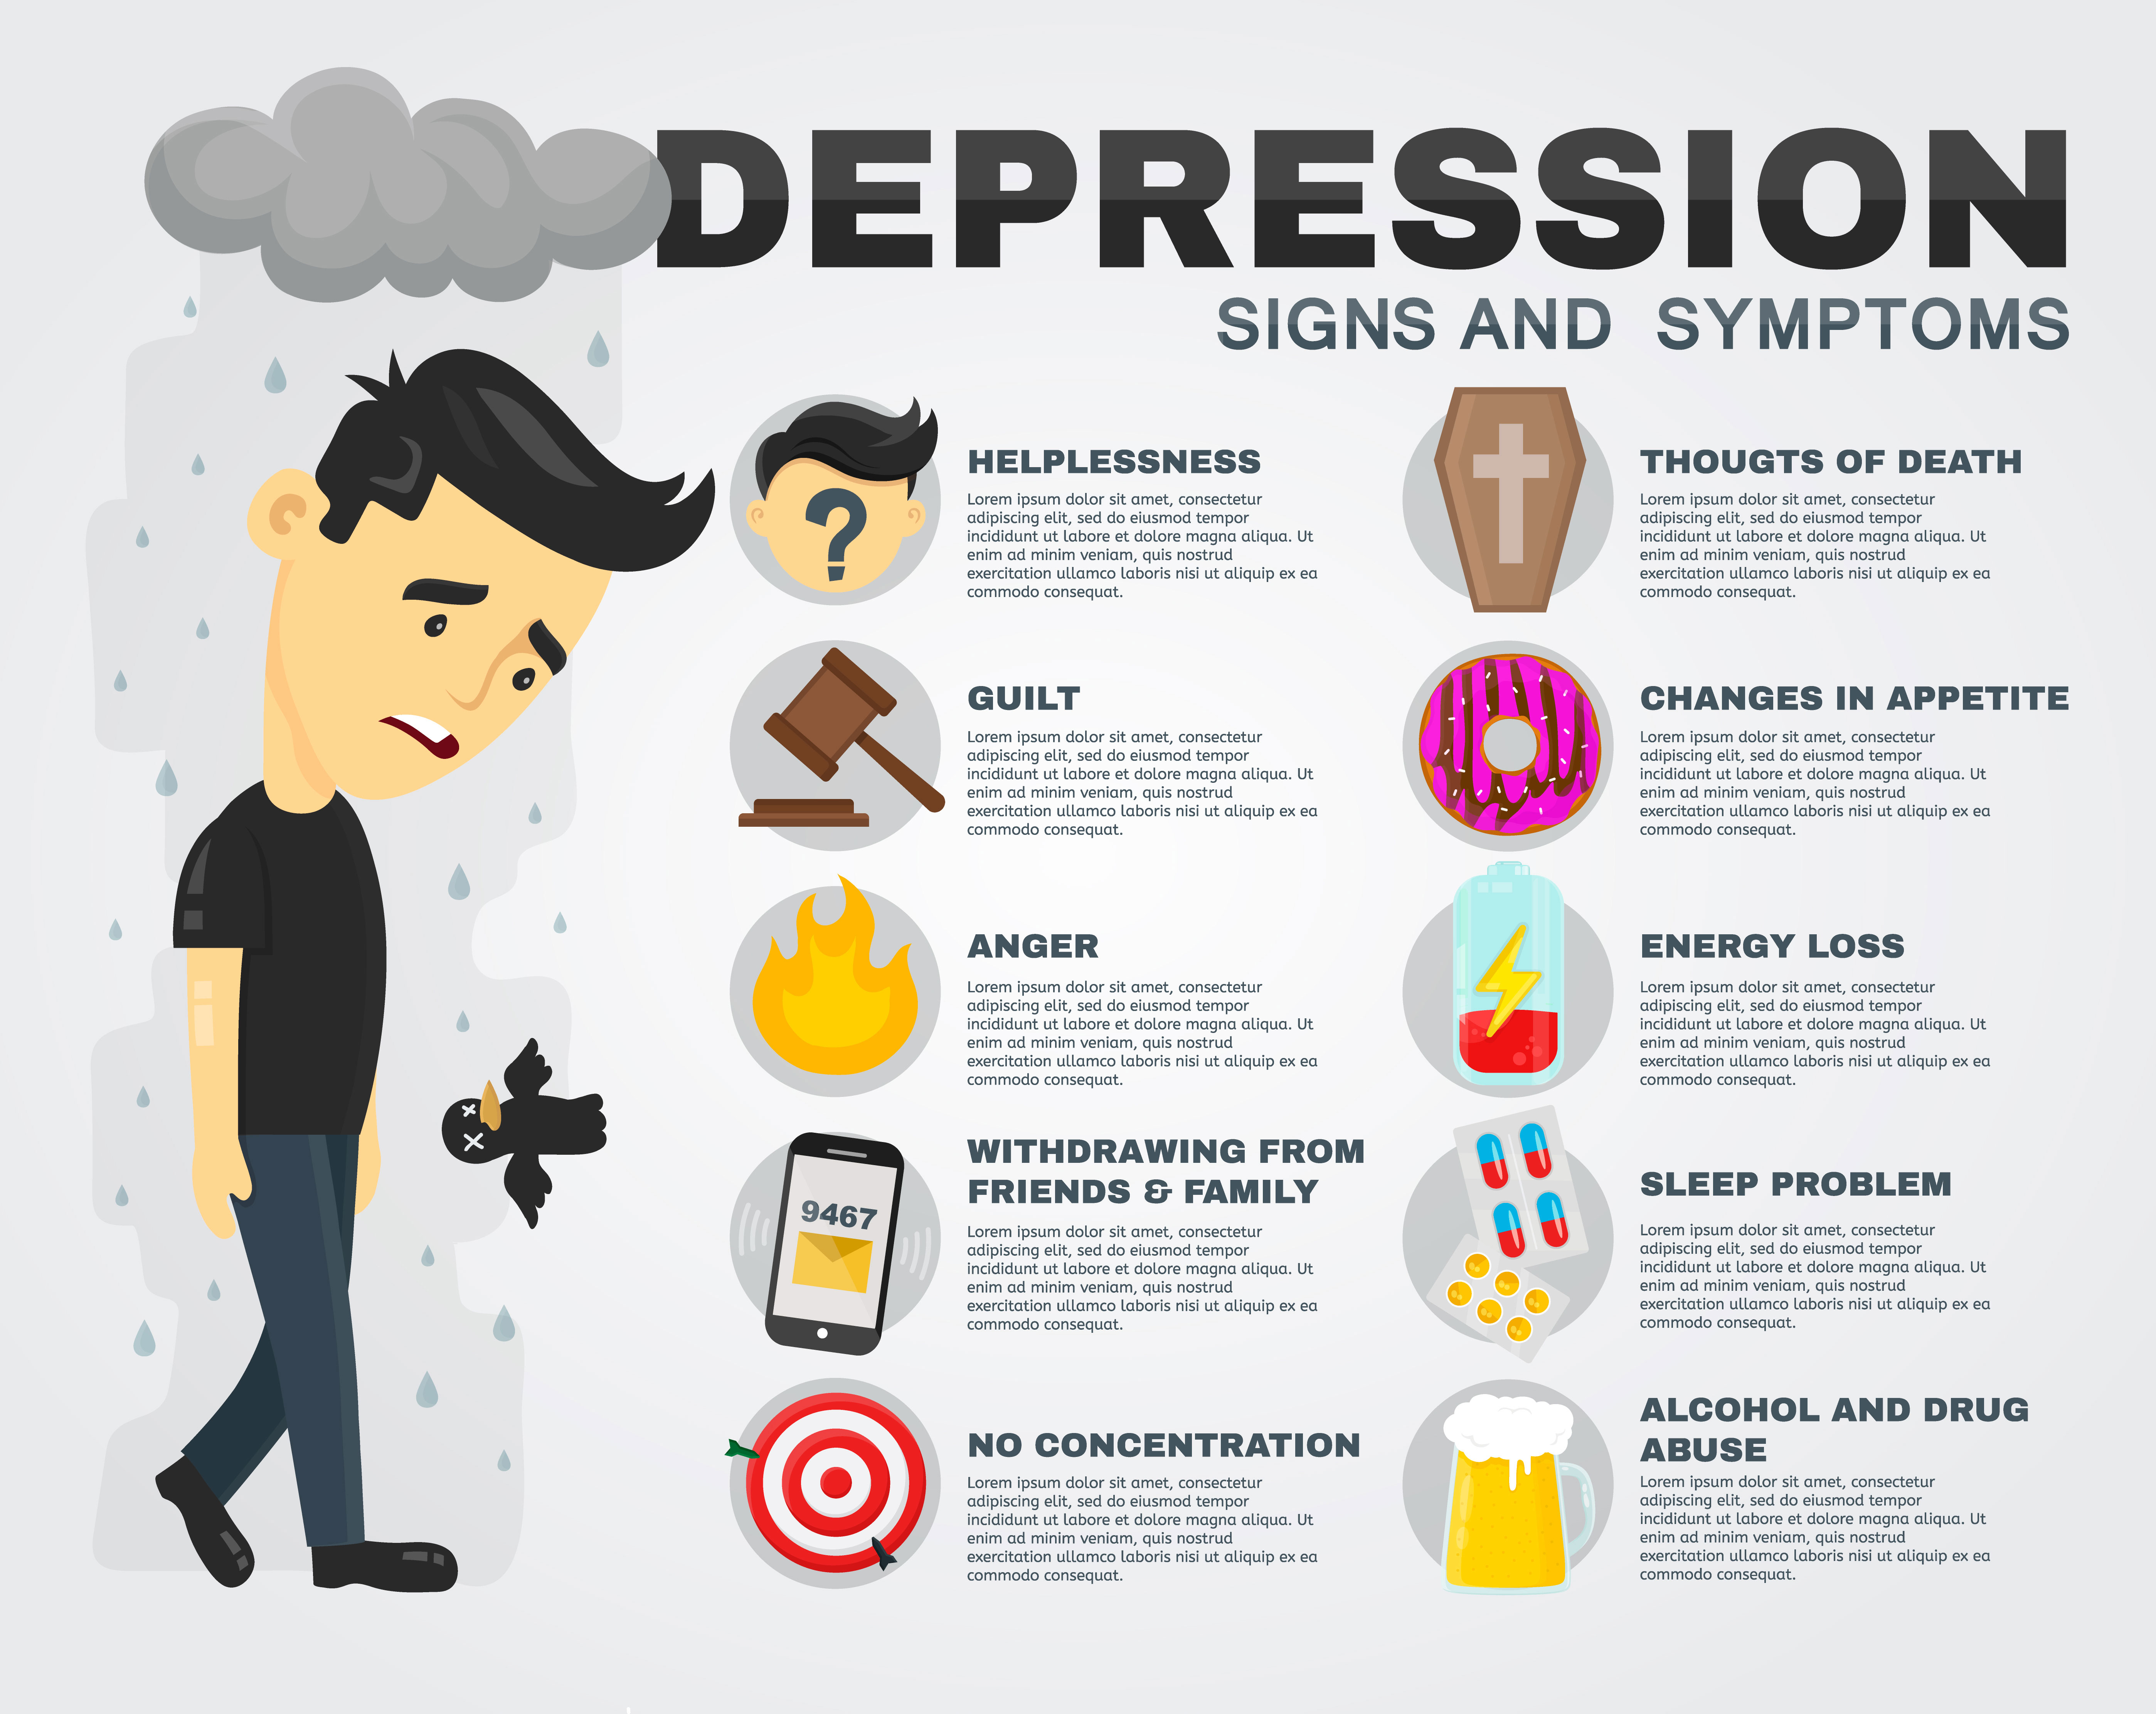 The Sign & Symptoms of Depression You Shouldn’t Ignore